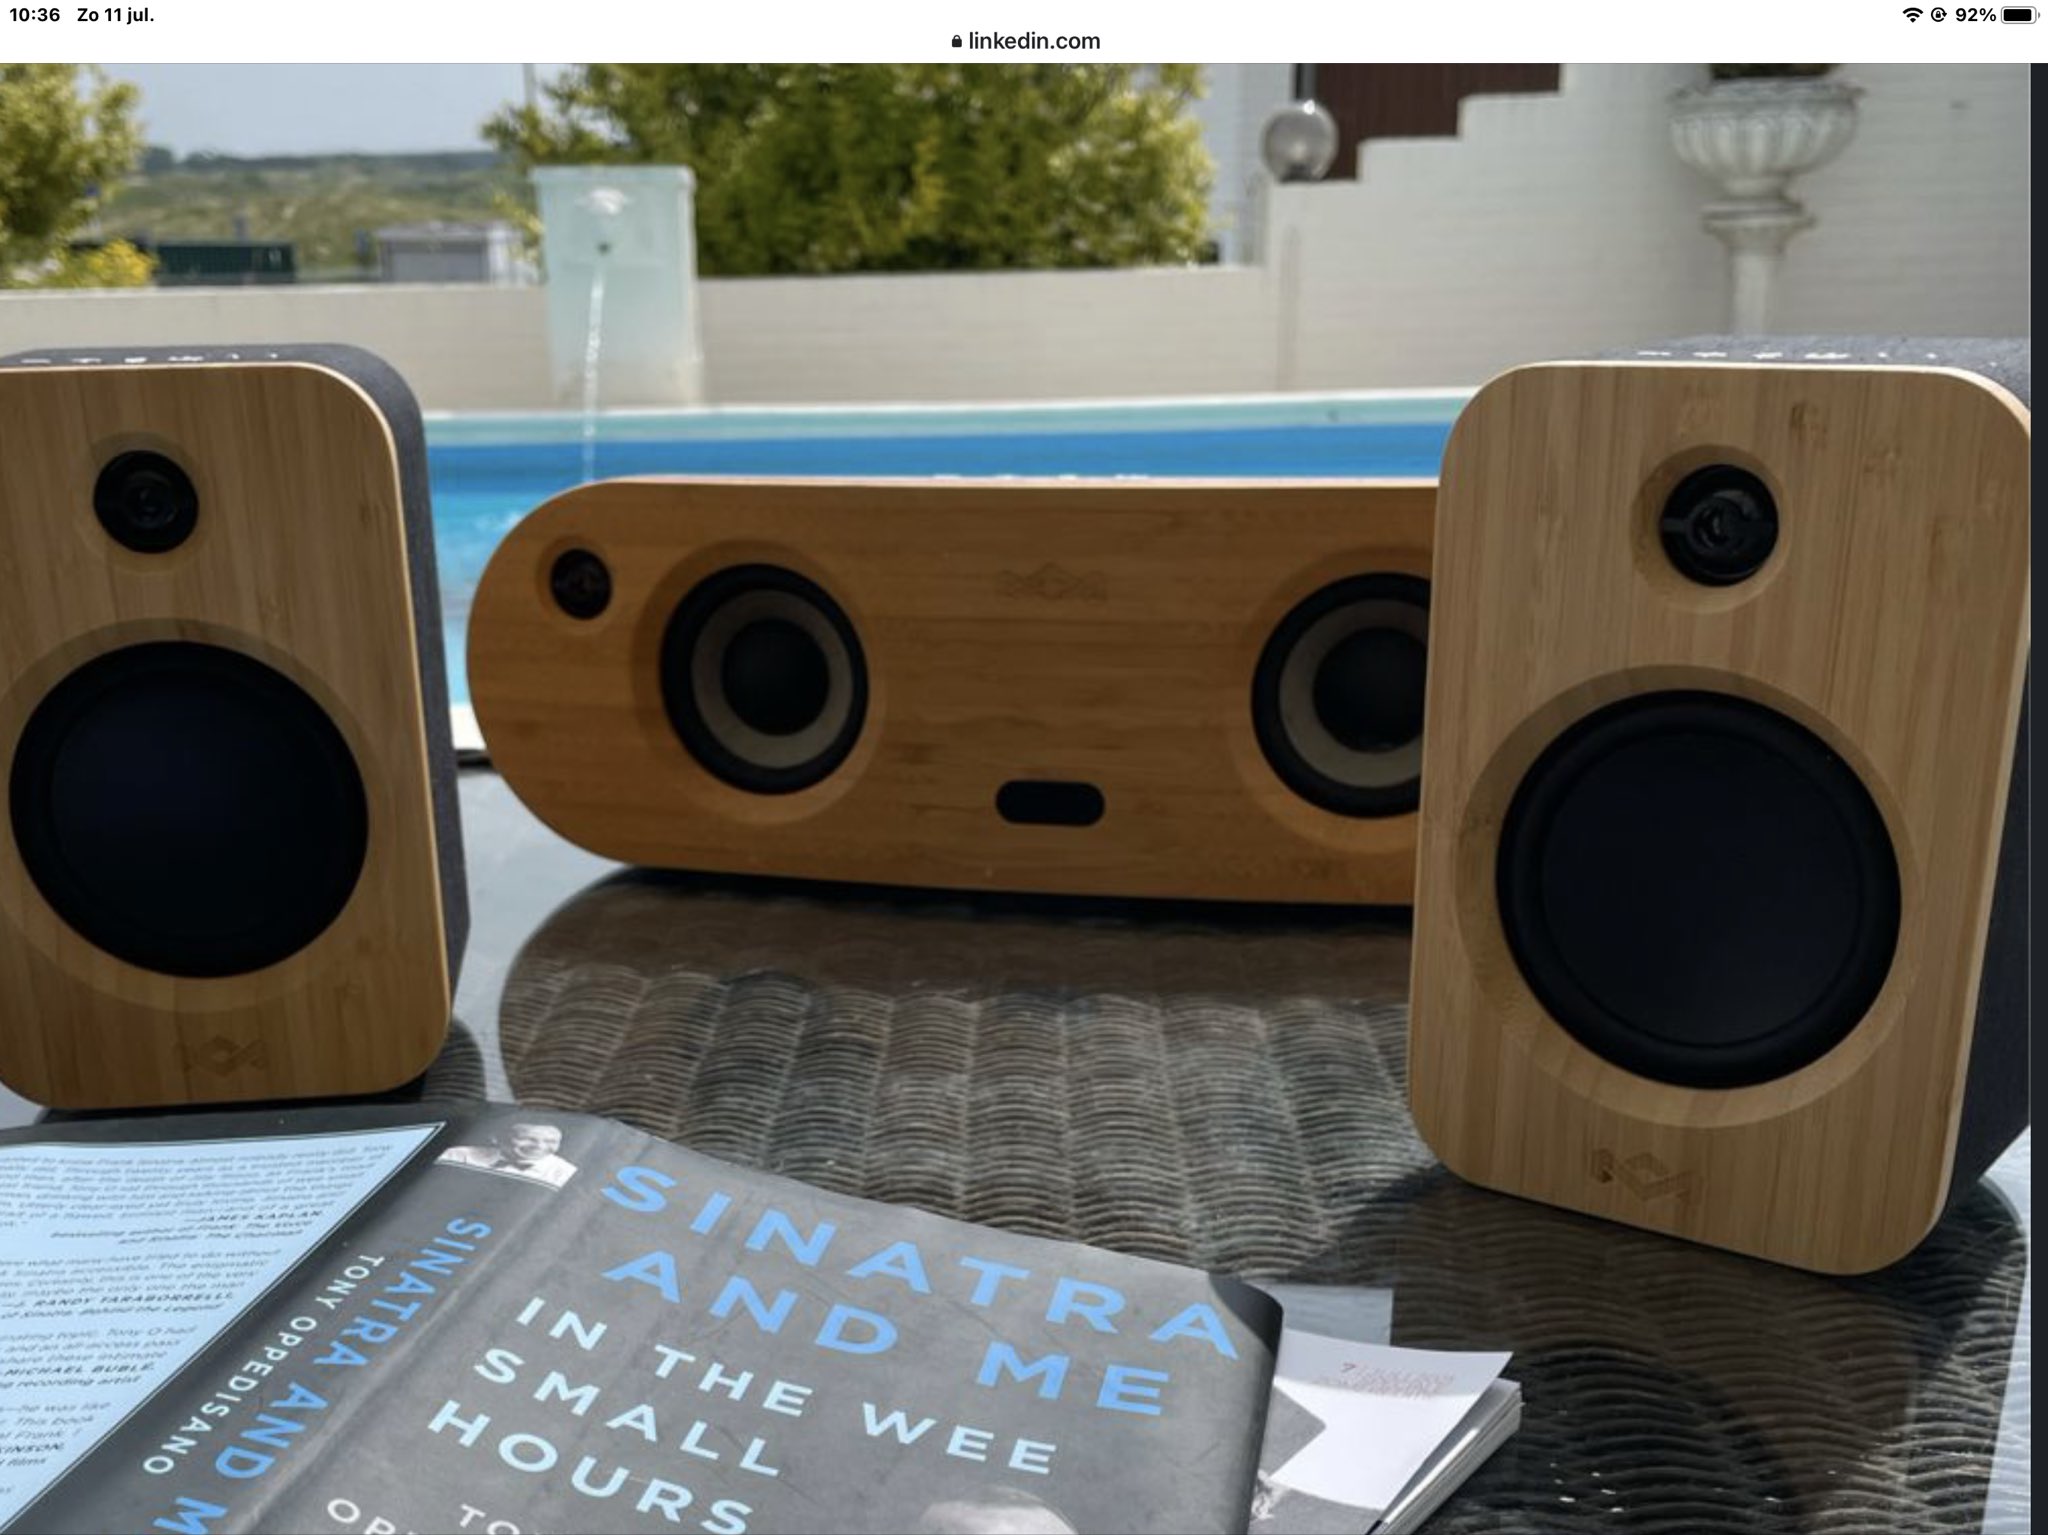 Get Together Duo Bluetooth Speakers